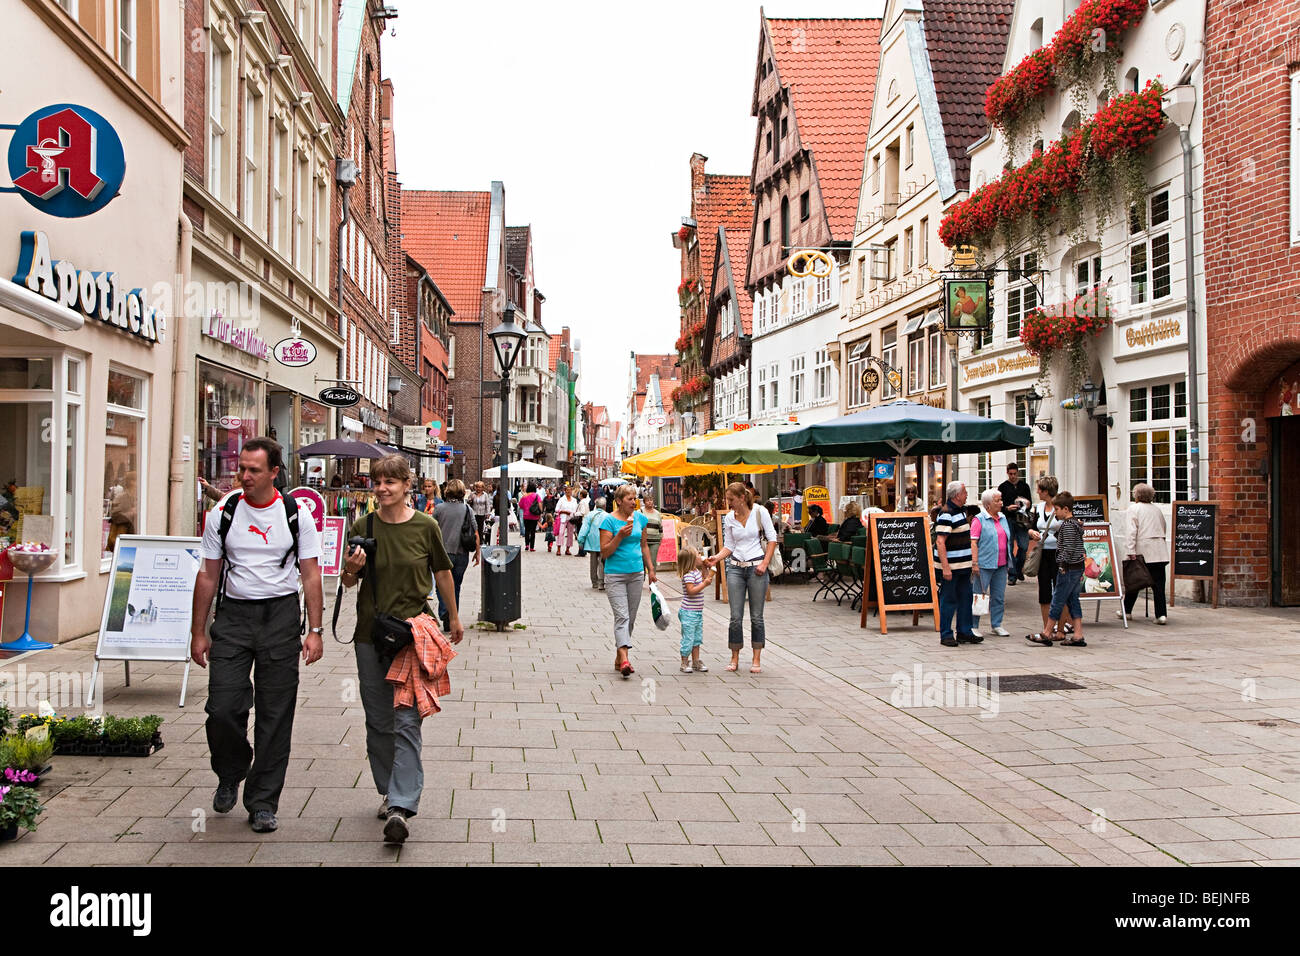 People in shopping street Luneburg Germany Stock Photo